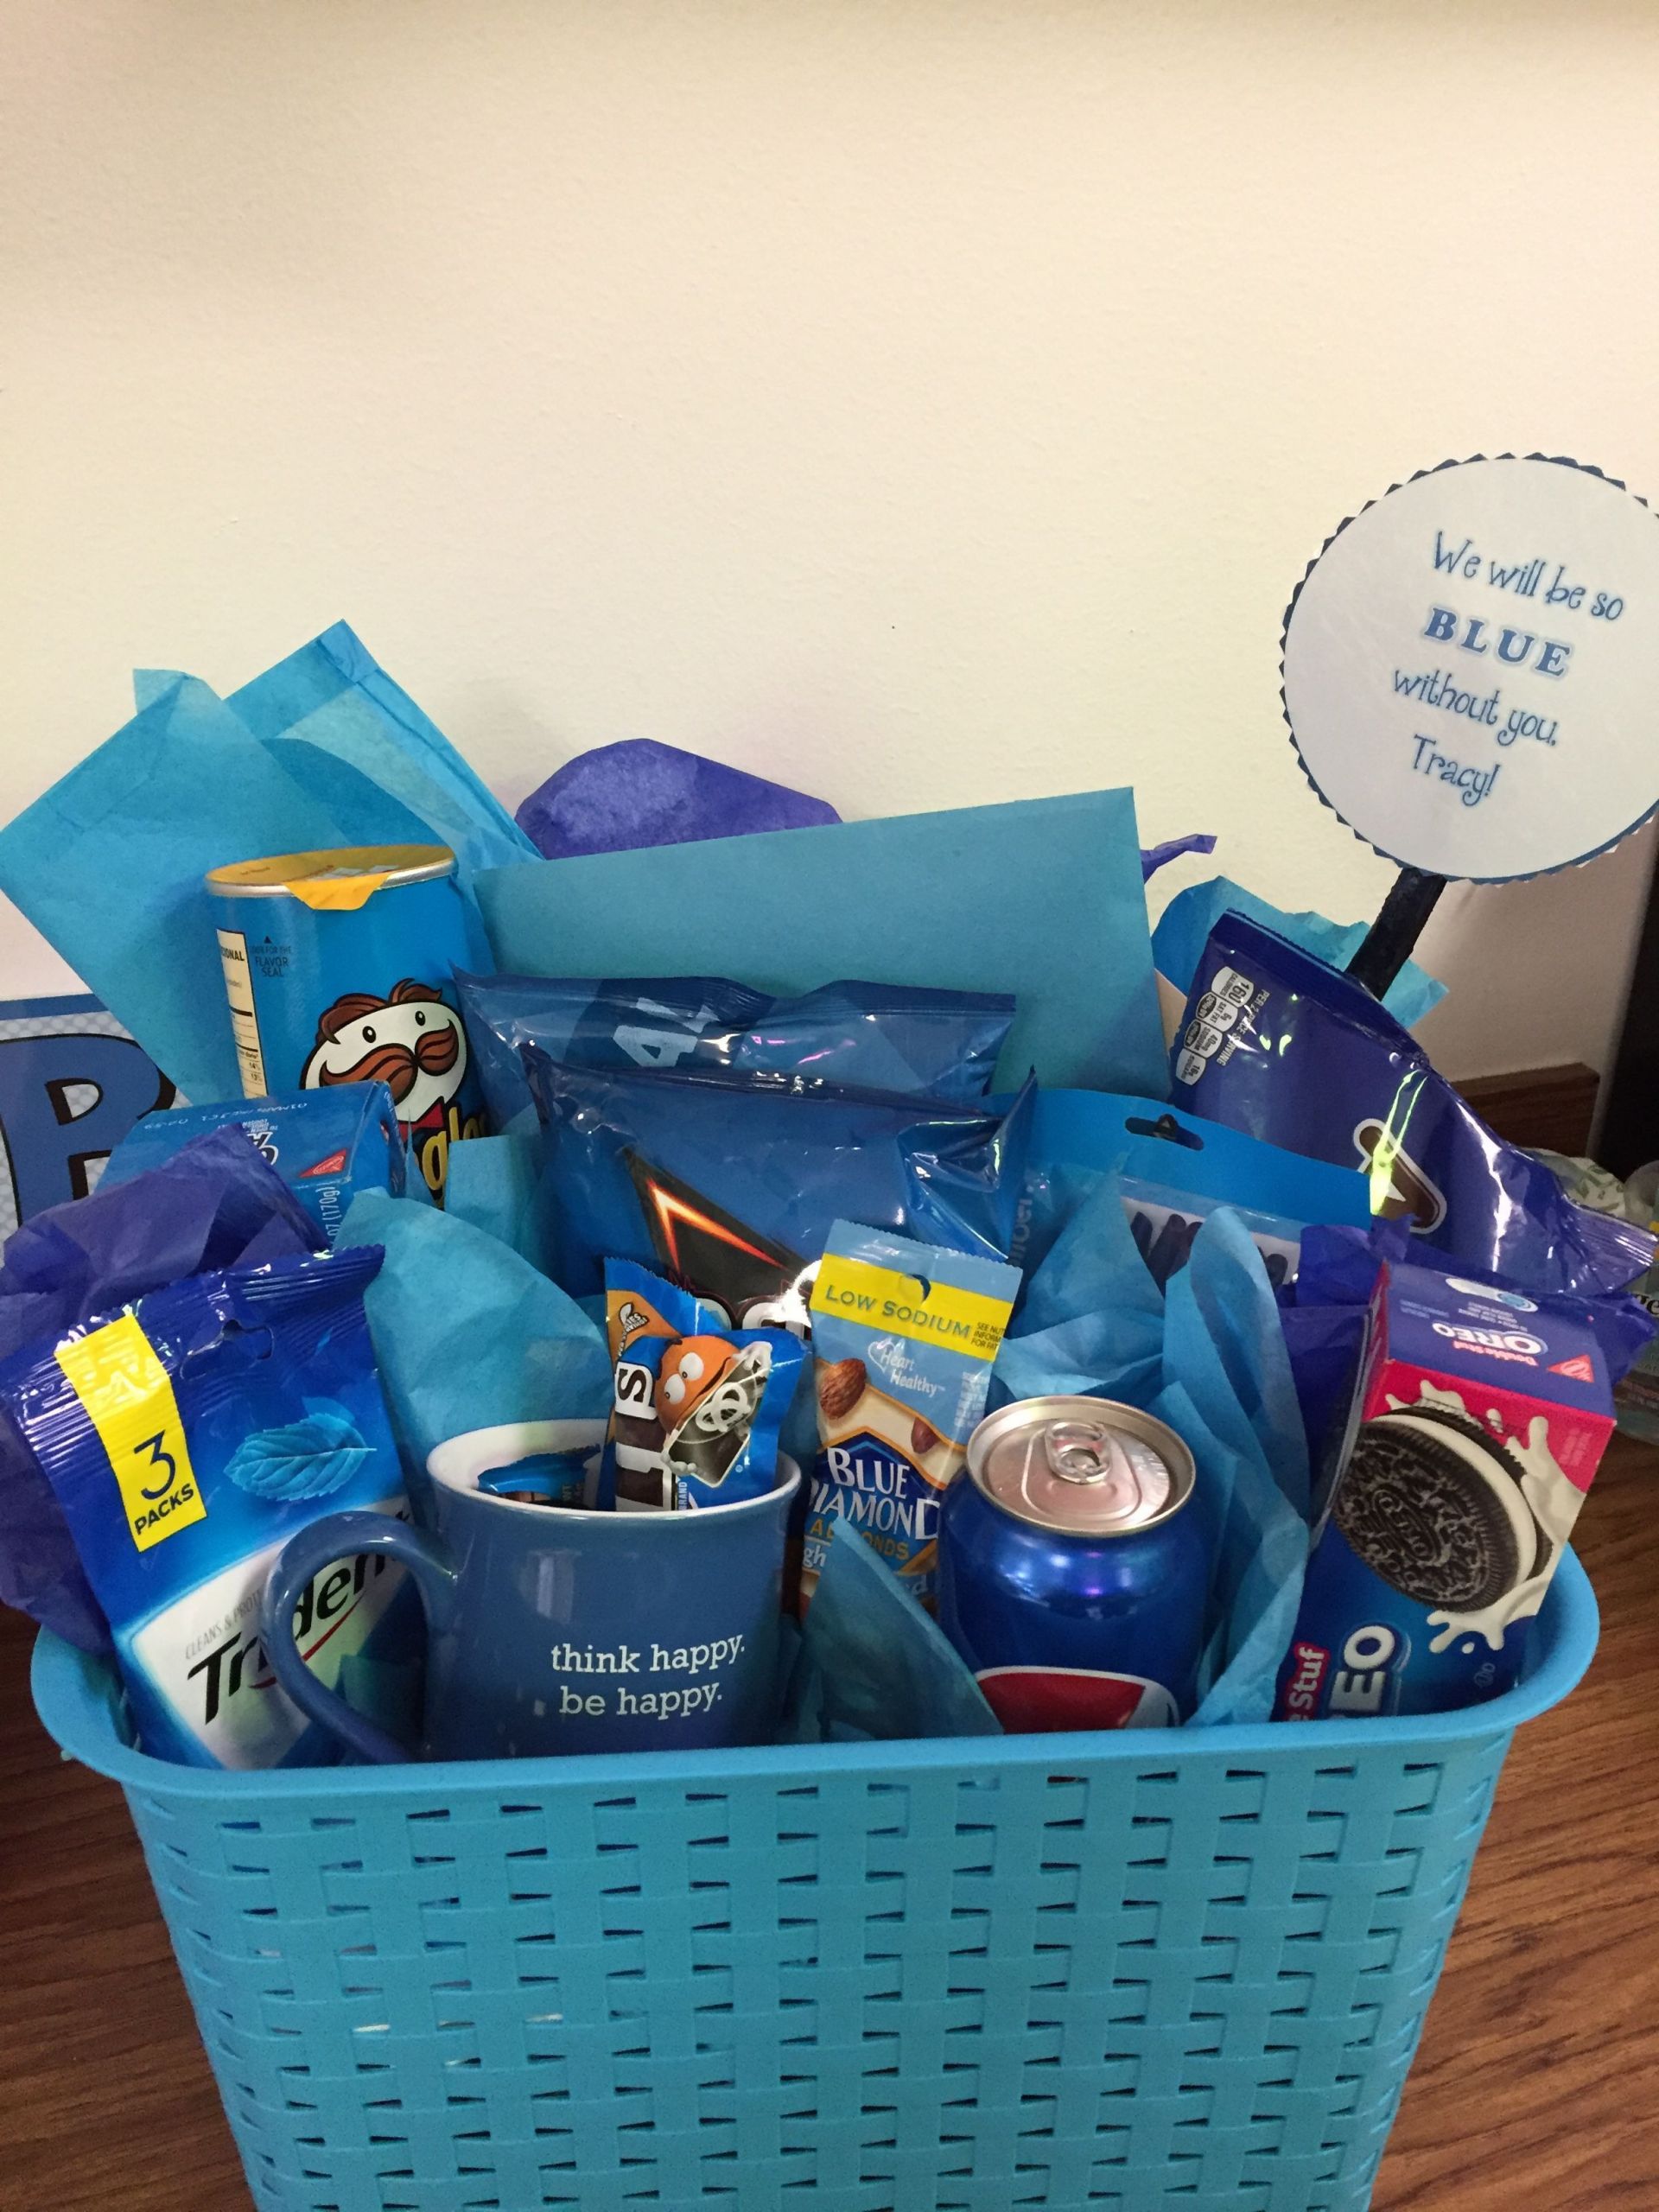 Going Away Gift Ideas For Girlfriend
 Coworker leaving "blue without you" going away basket